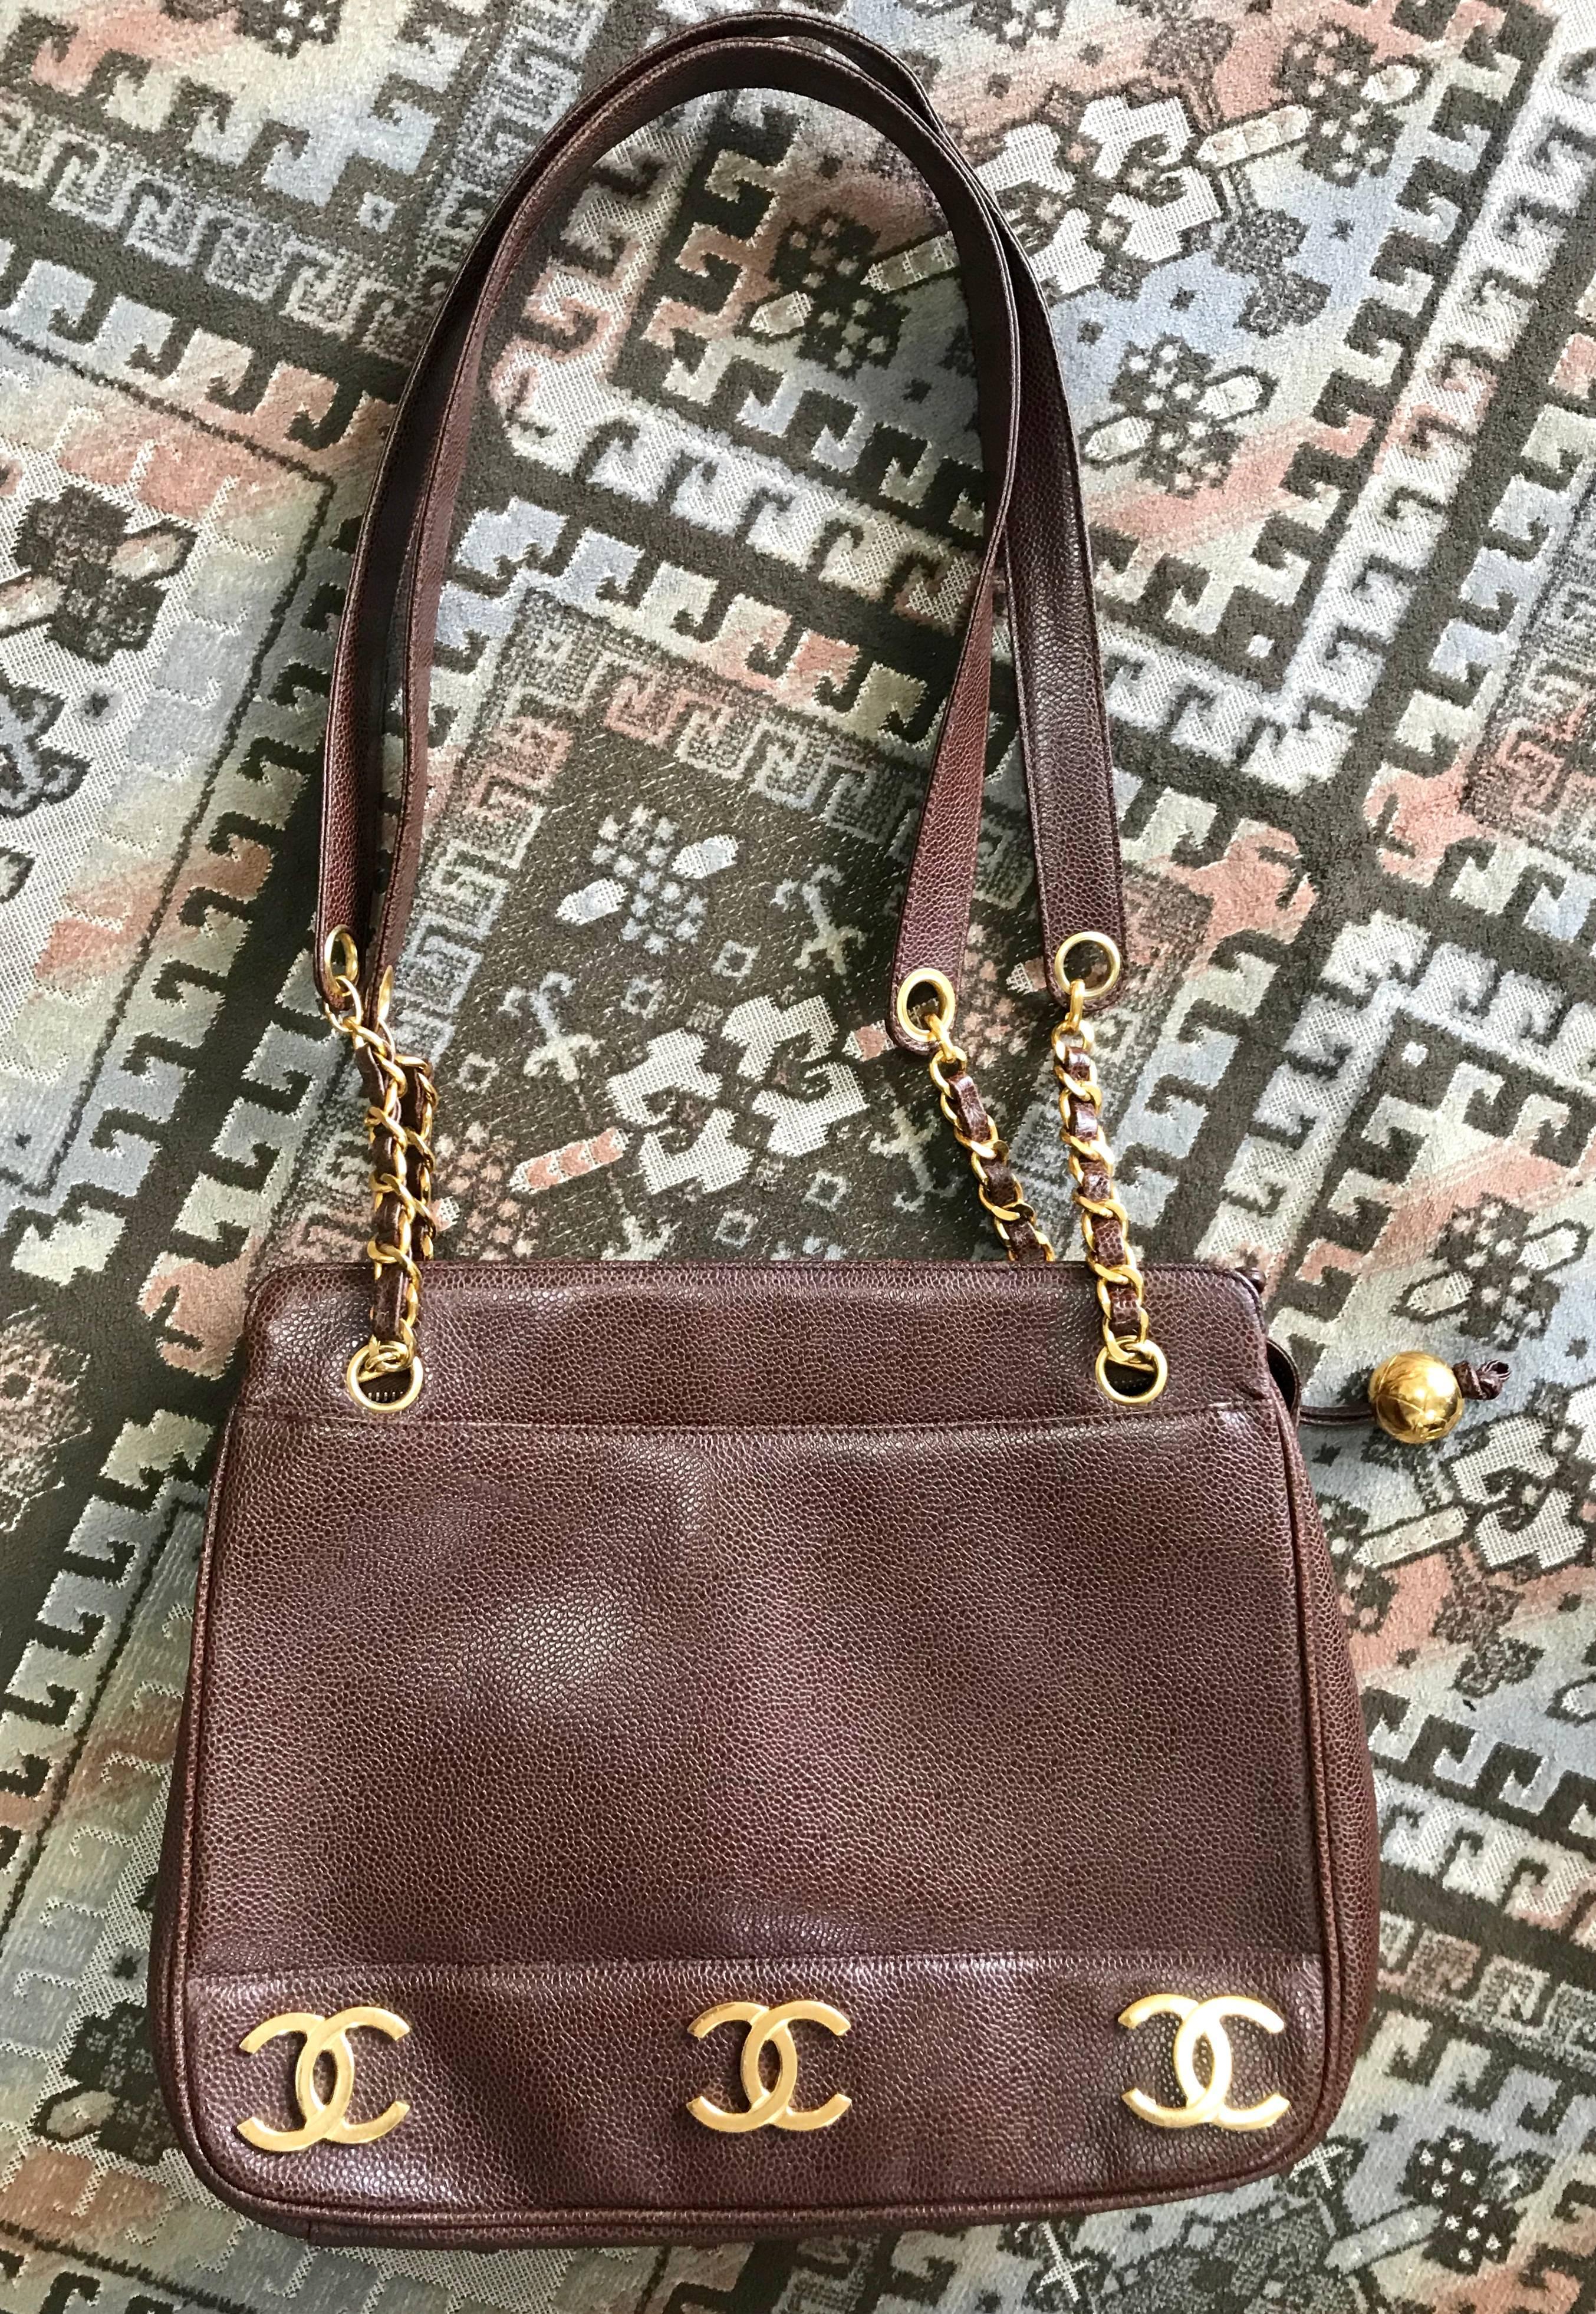 1990s. Vintage CHANEL brown caviar leather chain shoulder bag with 3 golden CC marks on both sides. Classic purse.

Beautiful condition!

Introducing another classic but elegant vintage CHANEL back in brown caviar leather back in the 90's.
Featuring